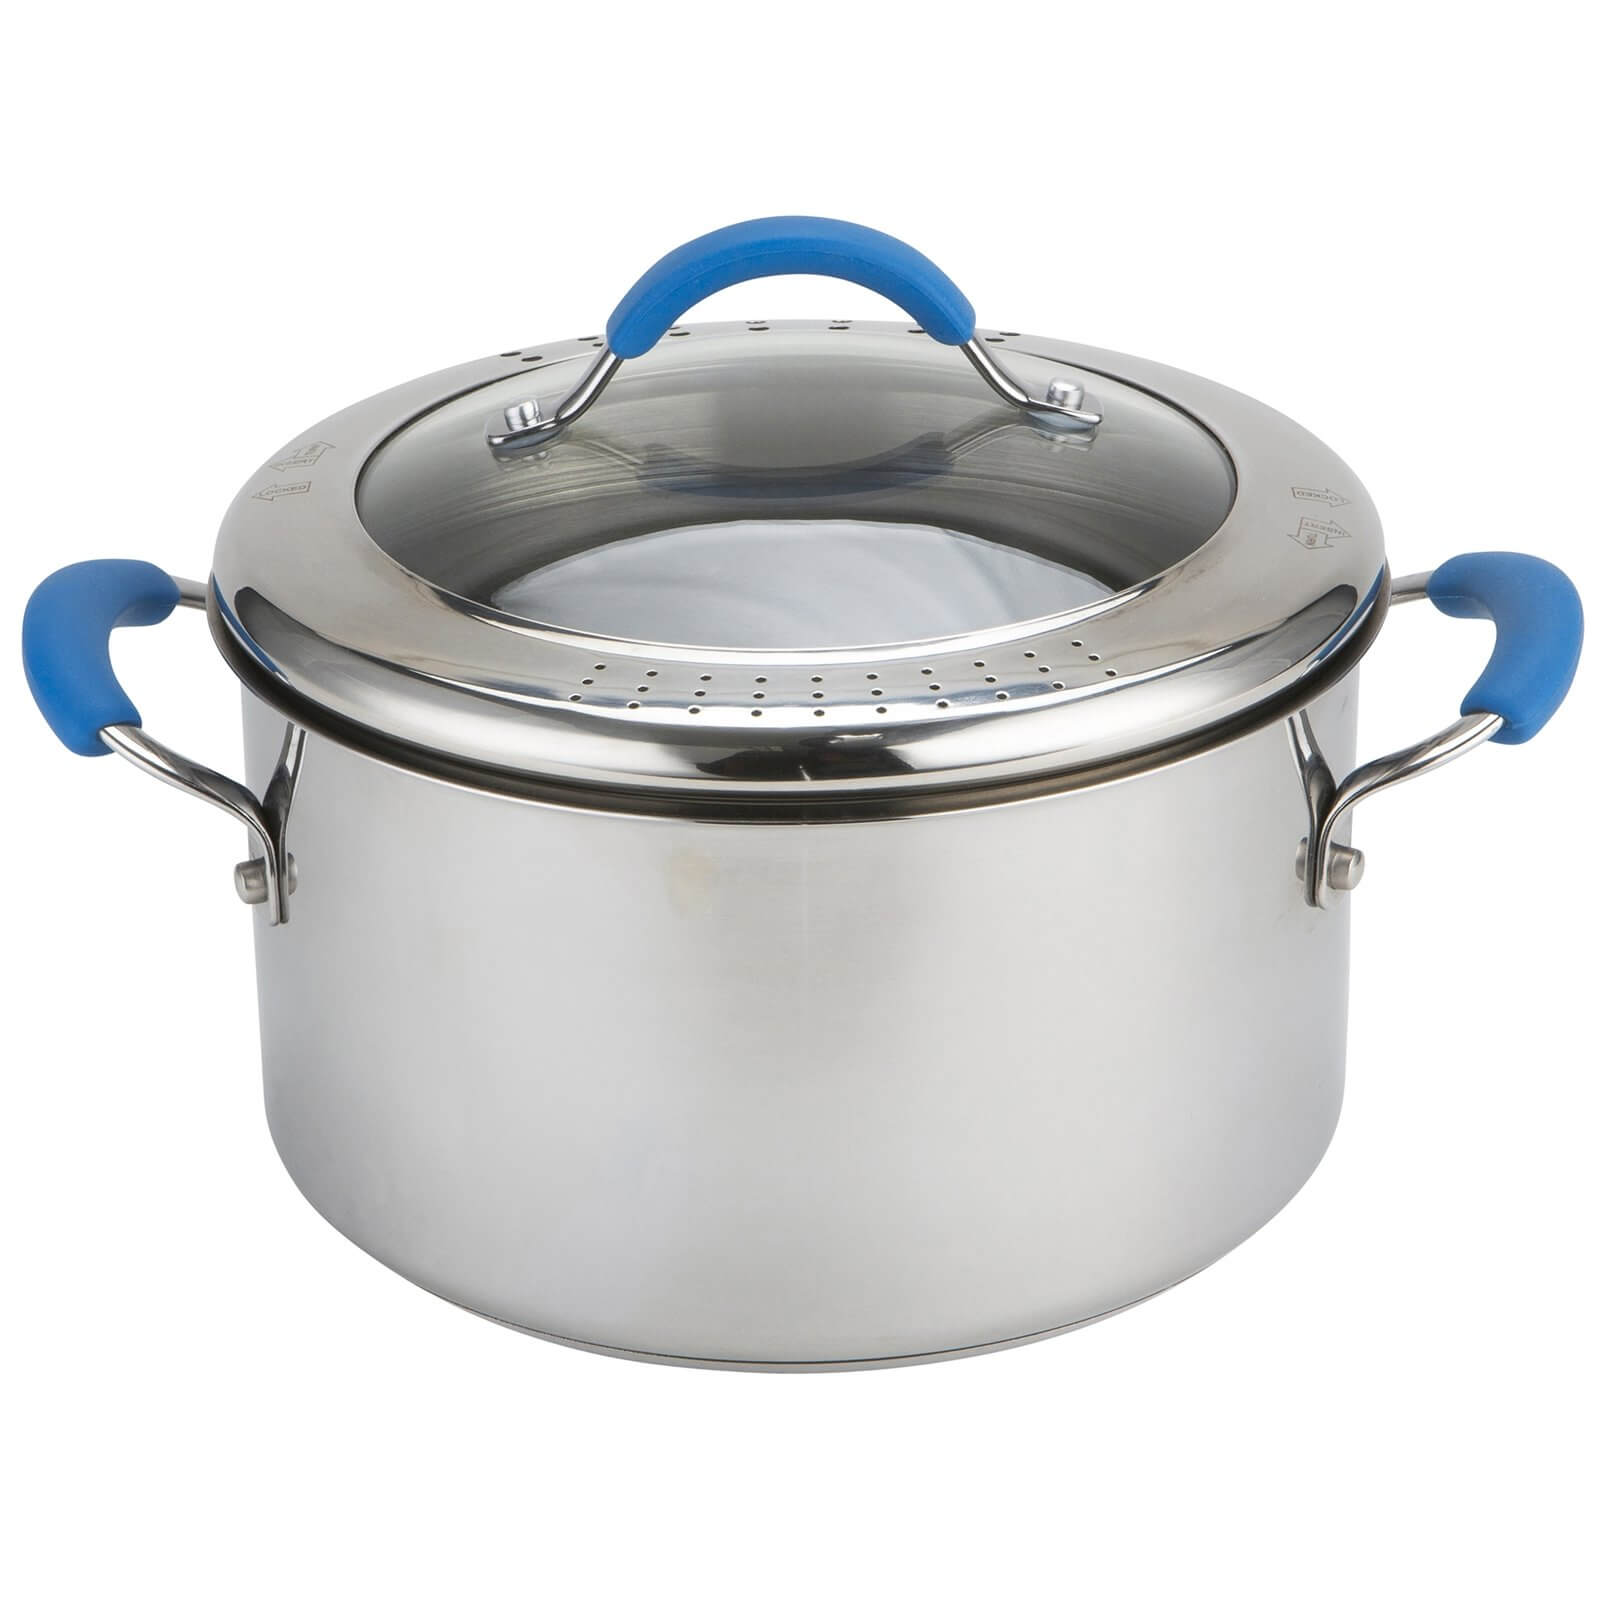 Joe Wicks Quick and Even Induction Non-Stick Stainless Steel Stockpot